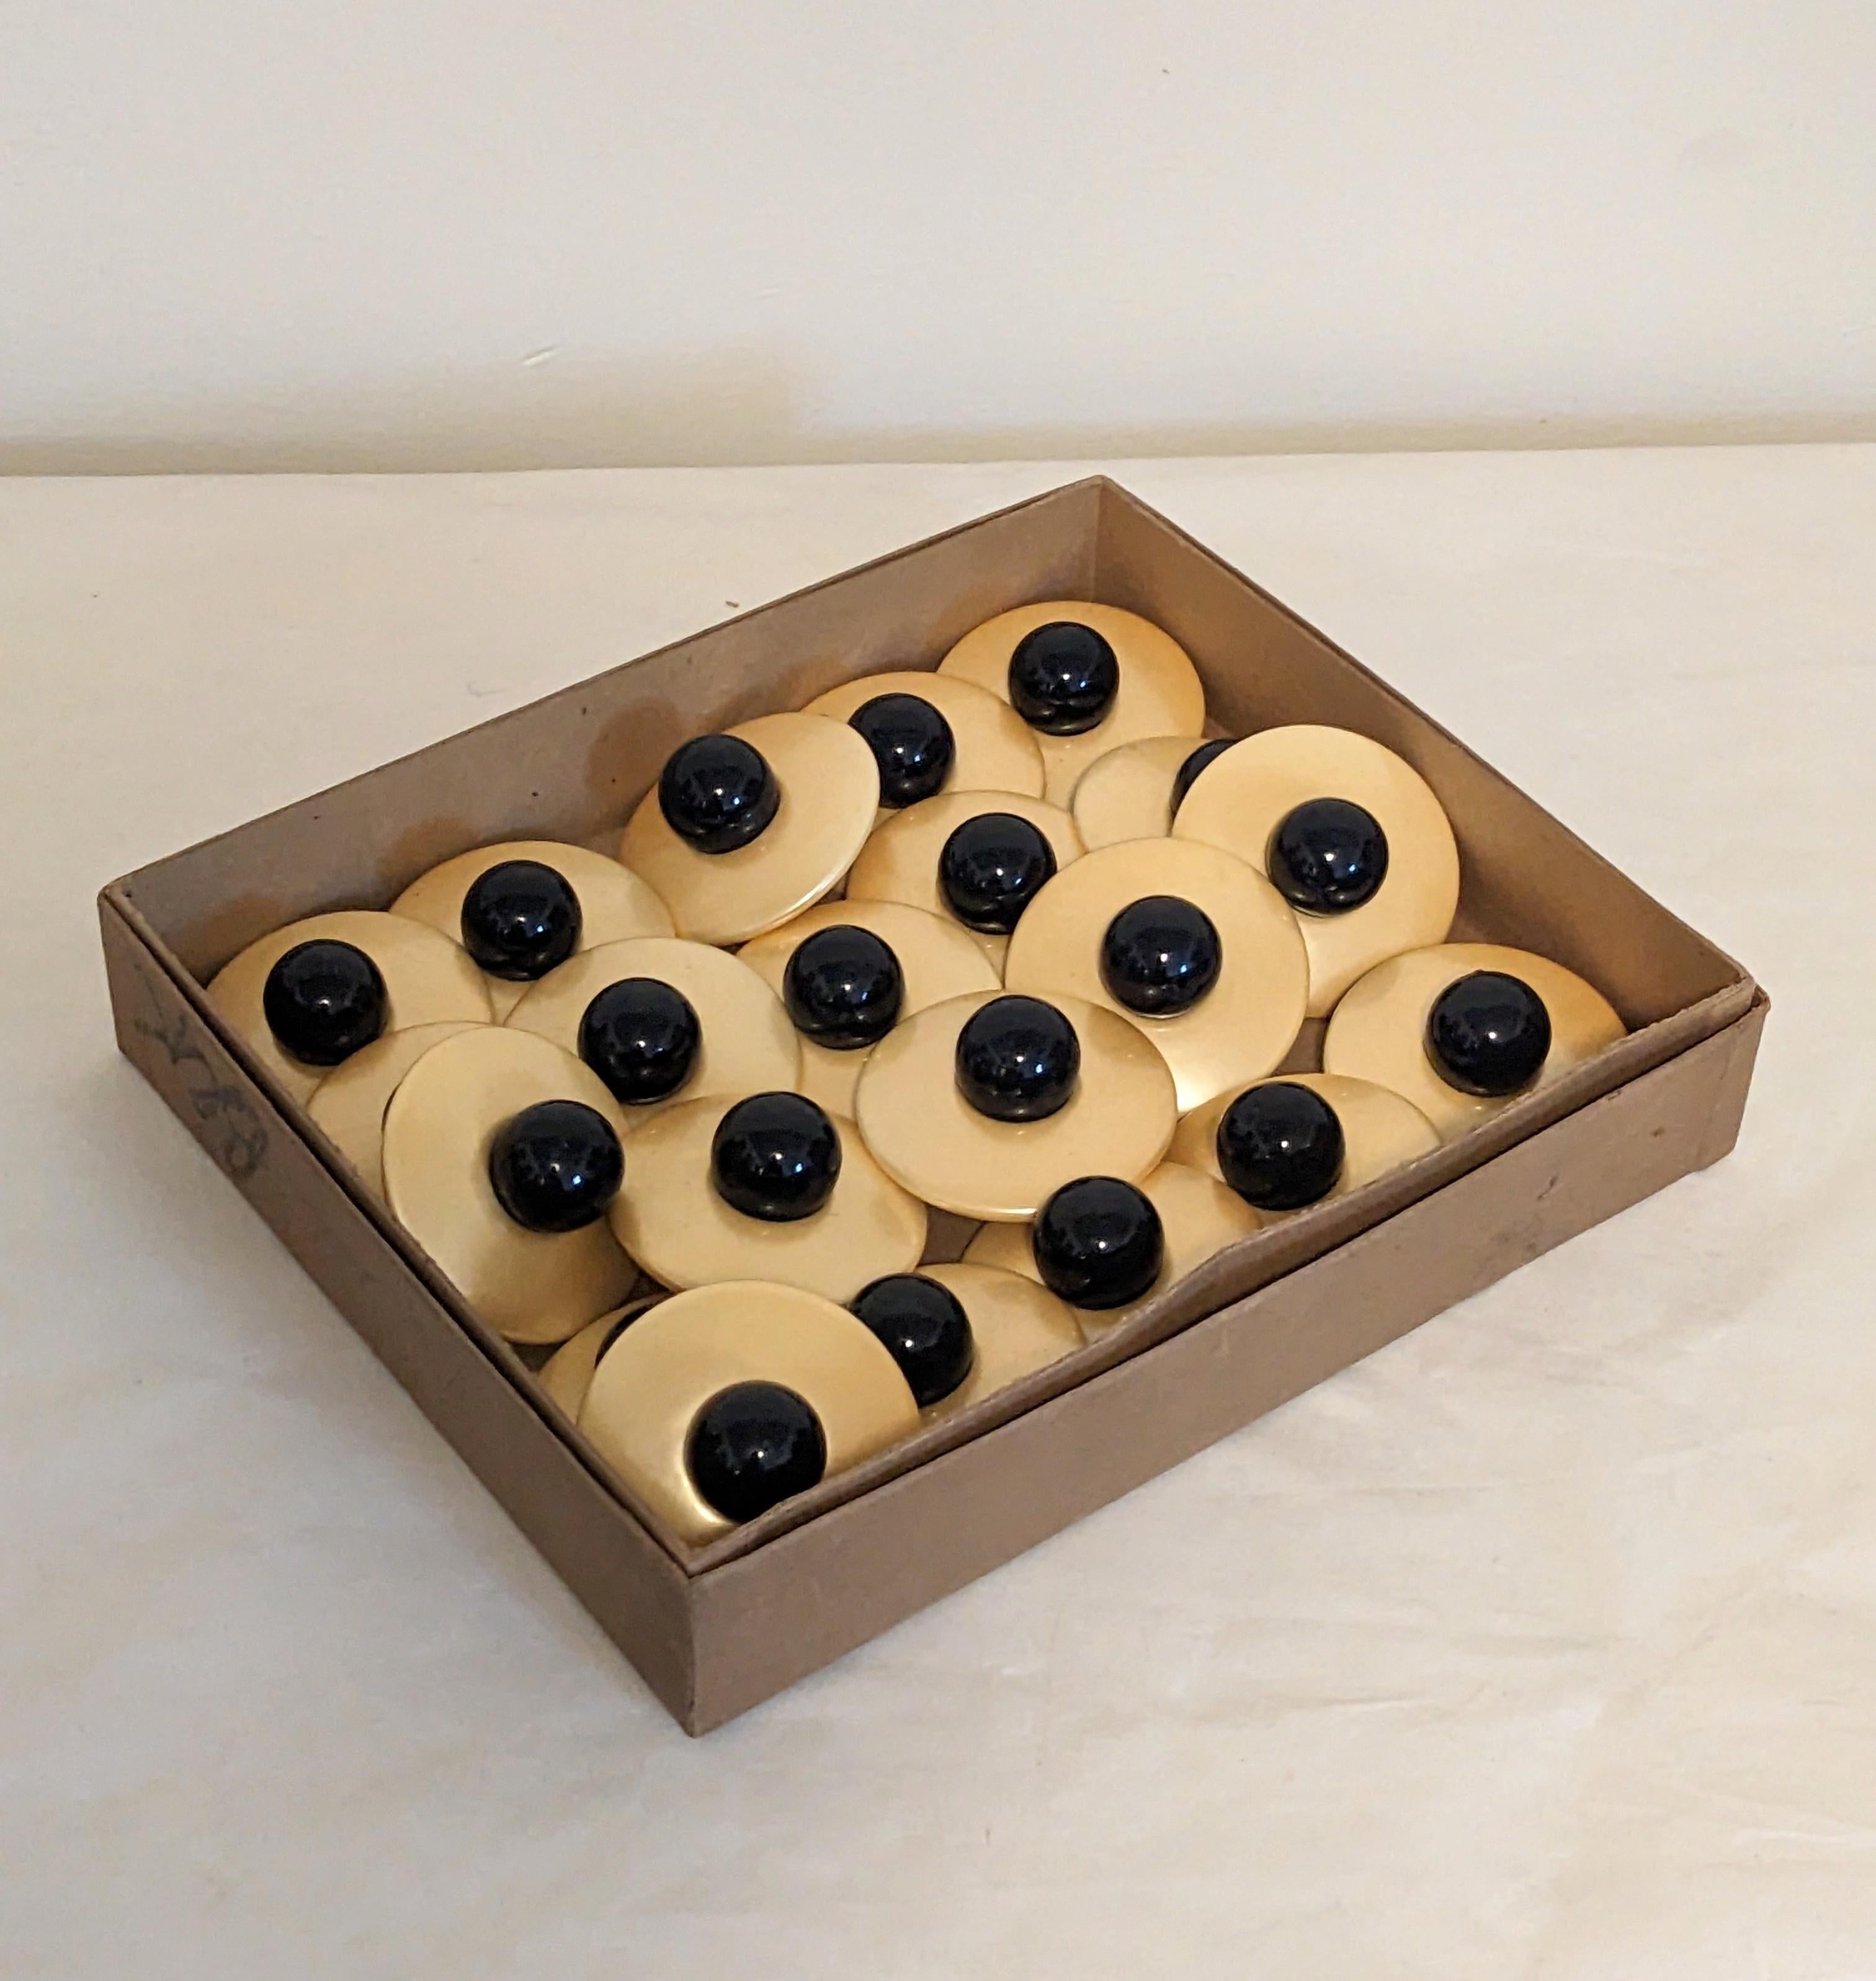 Oversized Art Deco Lacquered Buttons with mother of pearl and black lacquer. Made of wood with laquered finishes great for costuming. Donut shape base with large ball center. Each measures 2.25